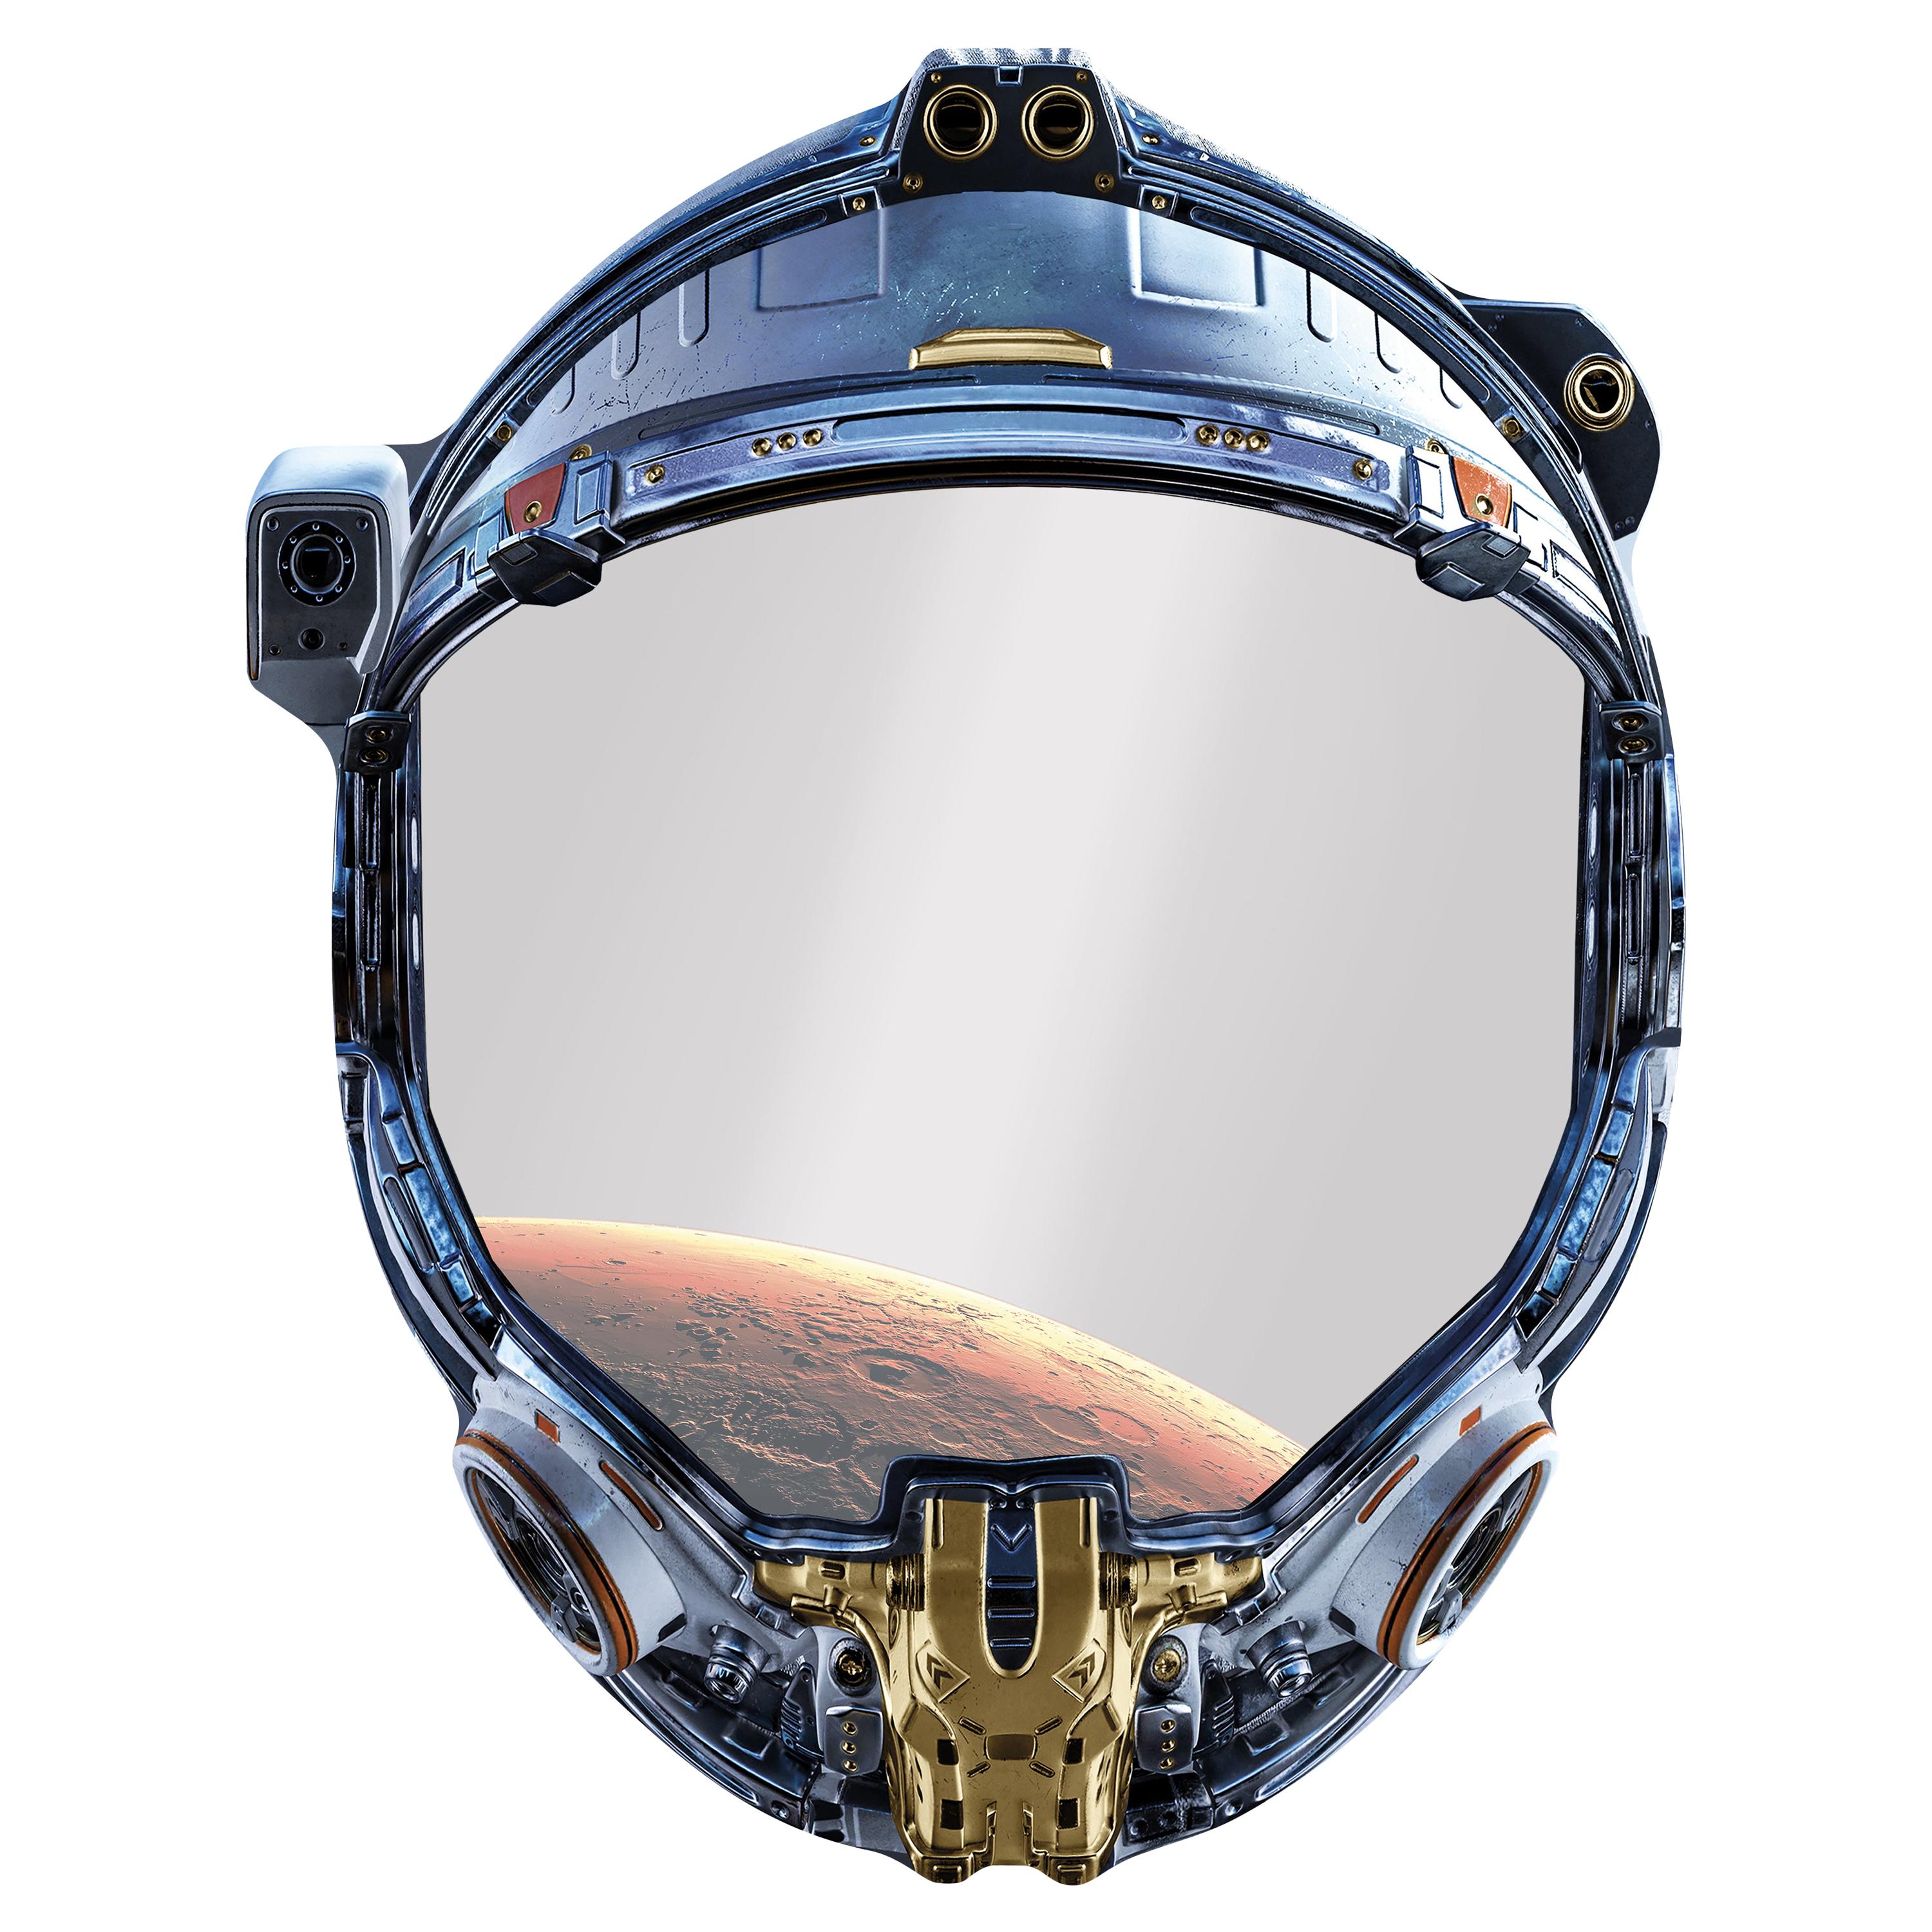 Space Cowboy n°10/30, Contemporary Wall Mirror with Printed Astronaut Helmet